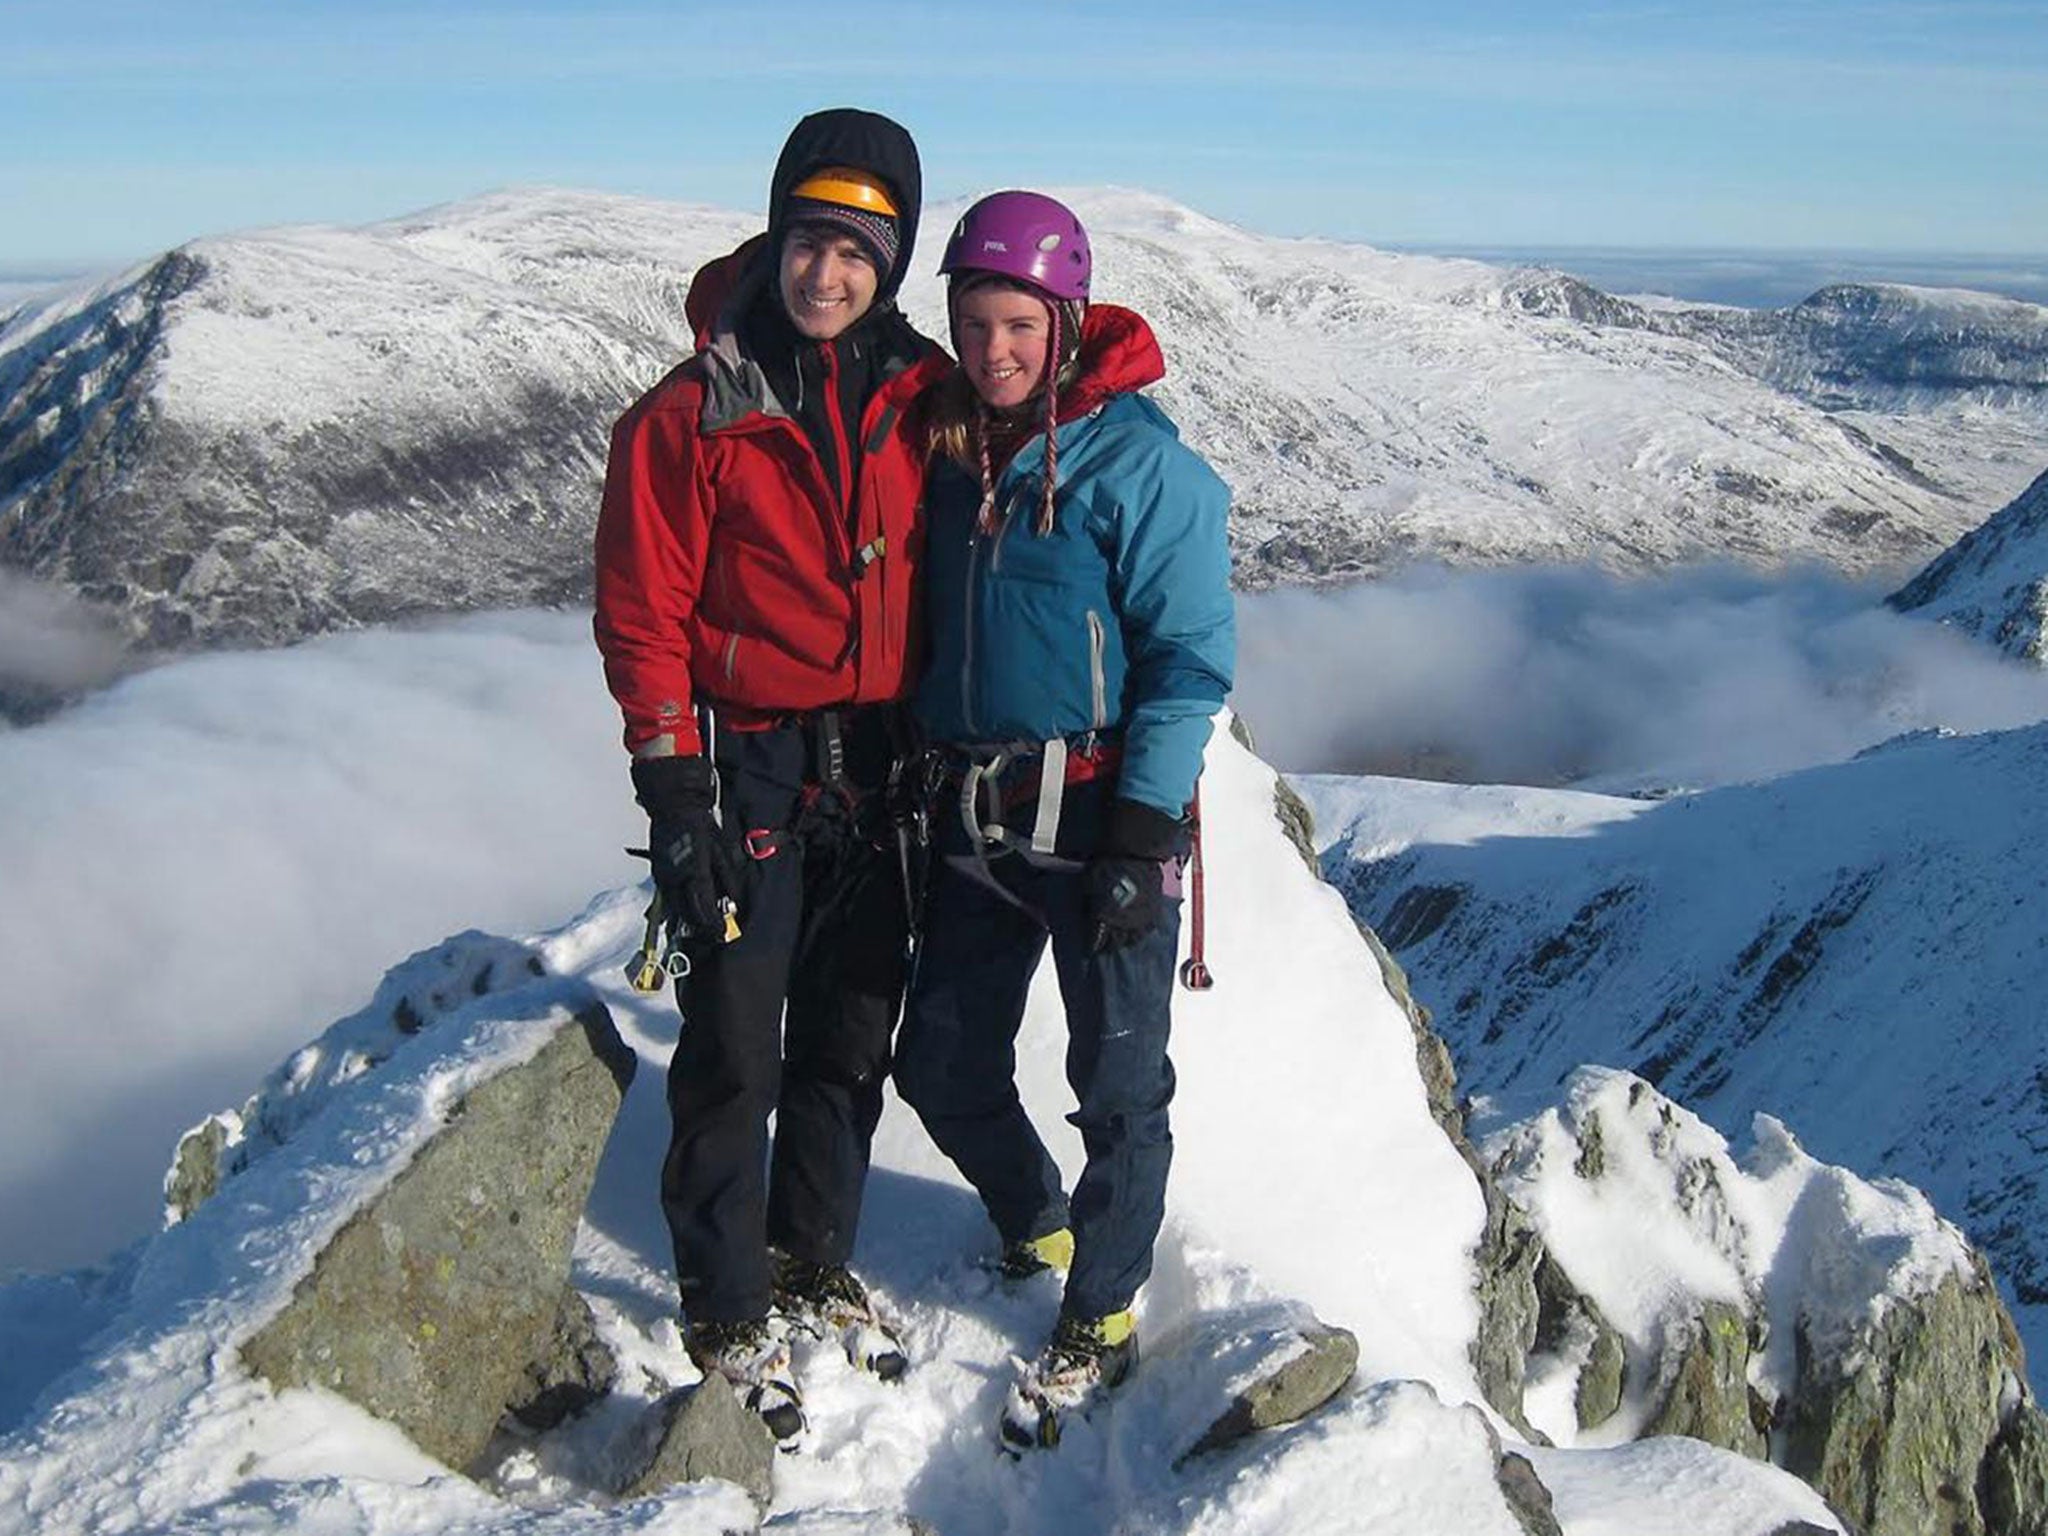 Rachel Slater and Tim Newton are missing after failing to return from a weekend climb